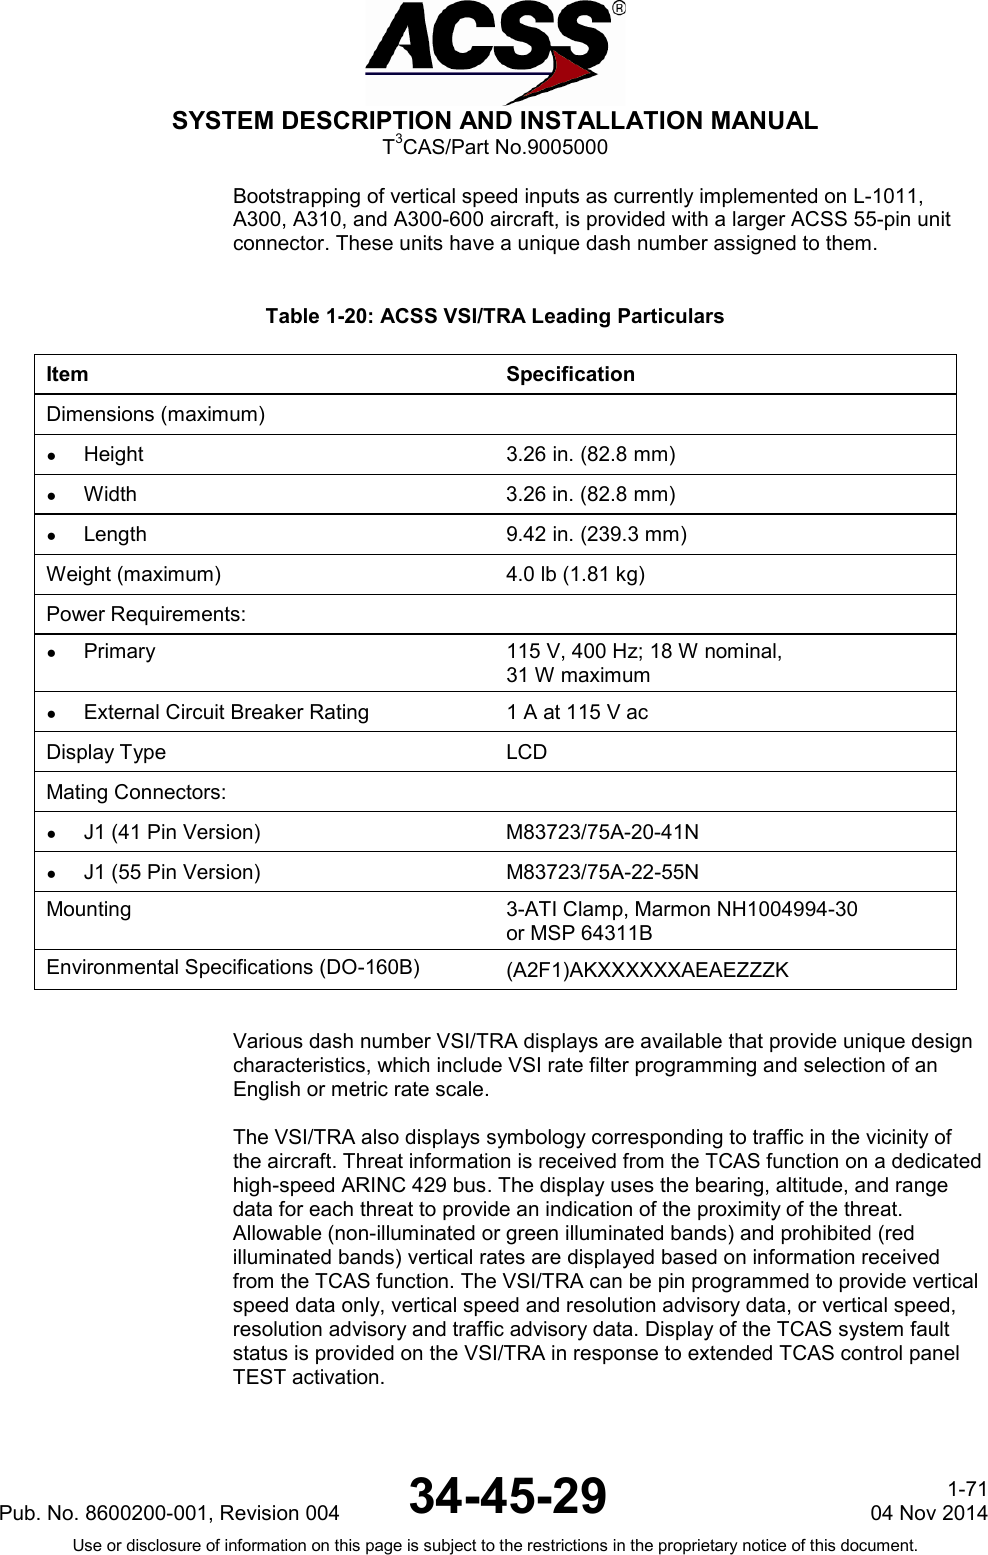  SYSTEM DESCRIPTION AND INSTALLATION MANUAL T3CAS/Part No.9005000 Bootstrapping of vertical speed inputs as currently implemented on L-1011, A300, A310, and A300-600 aircraft, is provided with a larger ACSS 55-pin unit connector. These units have a unique dash number assigned to them.  Table 1-20: ACSS VSI/TRA Leading Particulars Item Specification Dimensions (maximum)  ● Height 3.26 in. (82.8 mm) ●  Width 3.26 in. (82.8 mm) ● Length 9.42 in. (239.3 mm) Weight (maximum) 4.0 lb (1.81 kg) Power Requirements:  ● Primary 115 V, 400 Hz; 18 W nominal, 31 W maximum ● External Circuit Breaker Rating 1 A at 115 V ac Display Type LCD Mating Connectors:   ●  J1 (41 Pin Version) M83723/75A-20-41N ● J1 (55 Pin Version) M83723/75A-22-55N Mounting 3-ATI Clamp, Marmon NH1004994-30 or MSP 64311B Environmental Specifications (DO-160B) (A2F1)AKXXXXXXAEAEZZZK   Various dash number VSI/TRA displays are available that provide unique design characteristics, which include VSI rate filter programming and selection of an English or metric rate scale.  The VSI/TRA also displays symbology corresponding to traffic in the vicinity of the aircraft. Threat information is received from the TCAS function on a dedicated high-speed ARINC 429 bus. The display uses the bearing, altitude, and range data for each threat to provide an indication of the proximity of the threat. Allowable (non-illuminated or green illuminated bands) and prohibited (red illuminated bands) vertical rates are displayed based on information received from the TCAS function. The VSI/TRA can be pin programmed to provide vertical speed data only, vertical speed and resolution advisory data, or vertical speed, resolution advisory and traffic advisory data. Display of the TCAS system fault status is provided on the VSI/TRA in response to extended TCAS control panel TEST activation.  Pub. No. 8600200-001, Revision 004 34-45-29 1-71 04 Nov 2014 Use or disclosure of information on this page is subject to the restrictions in the proprietary notice of this document.  